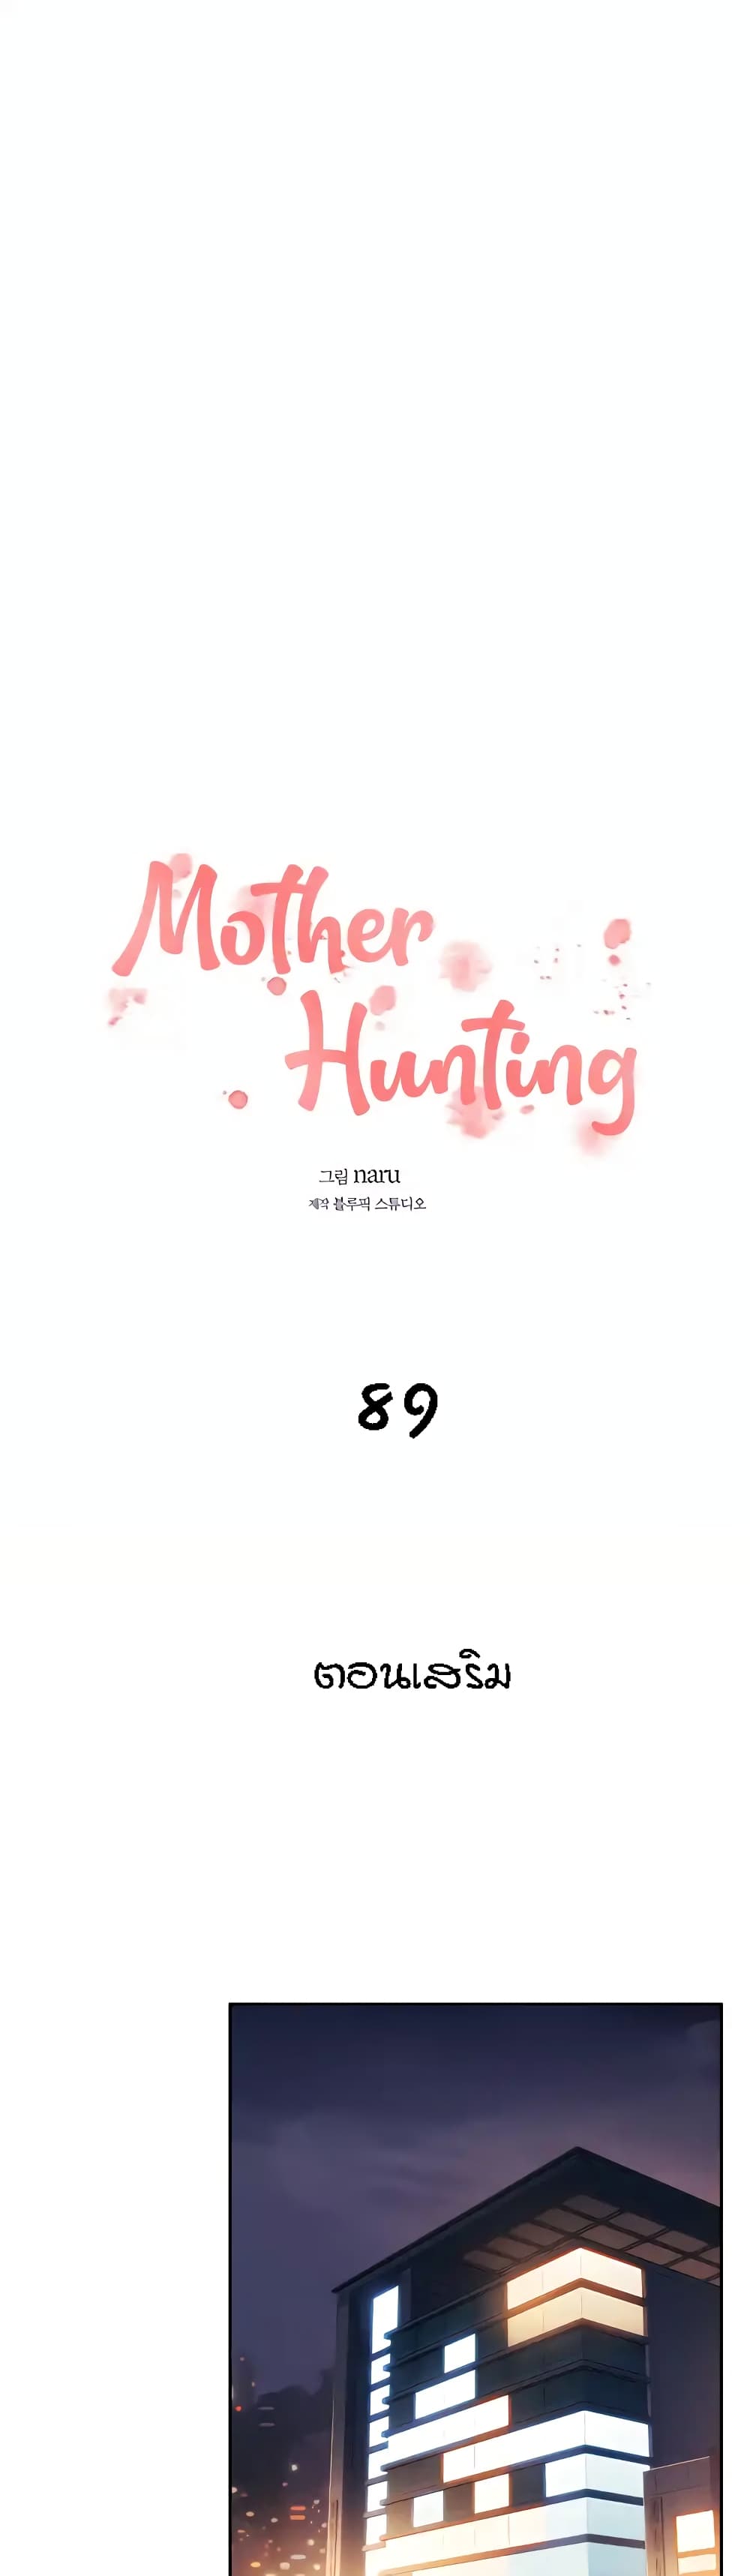 Mother Hunting 89-89